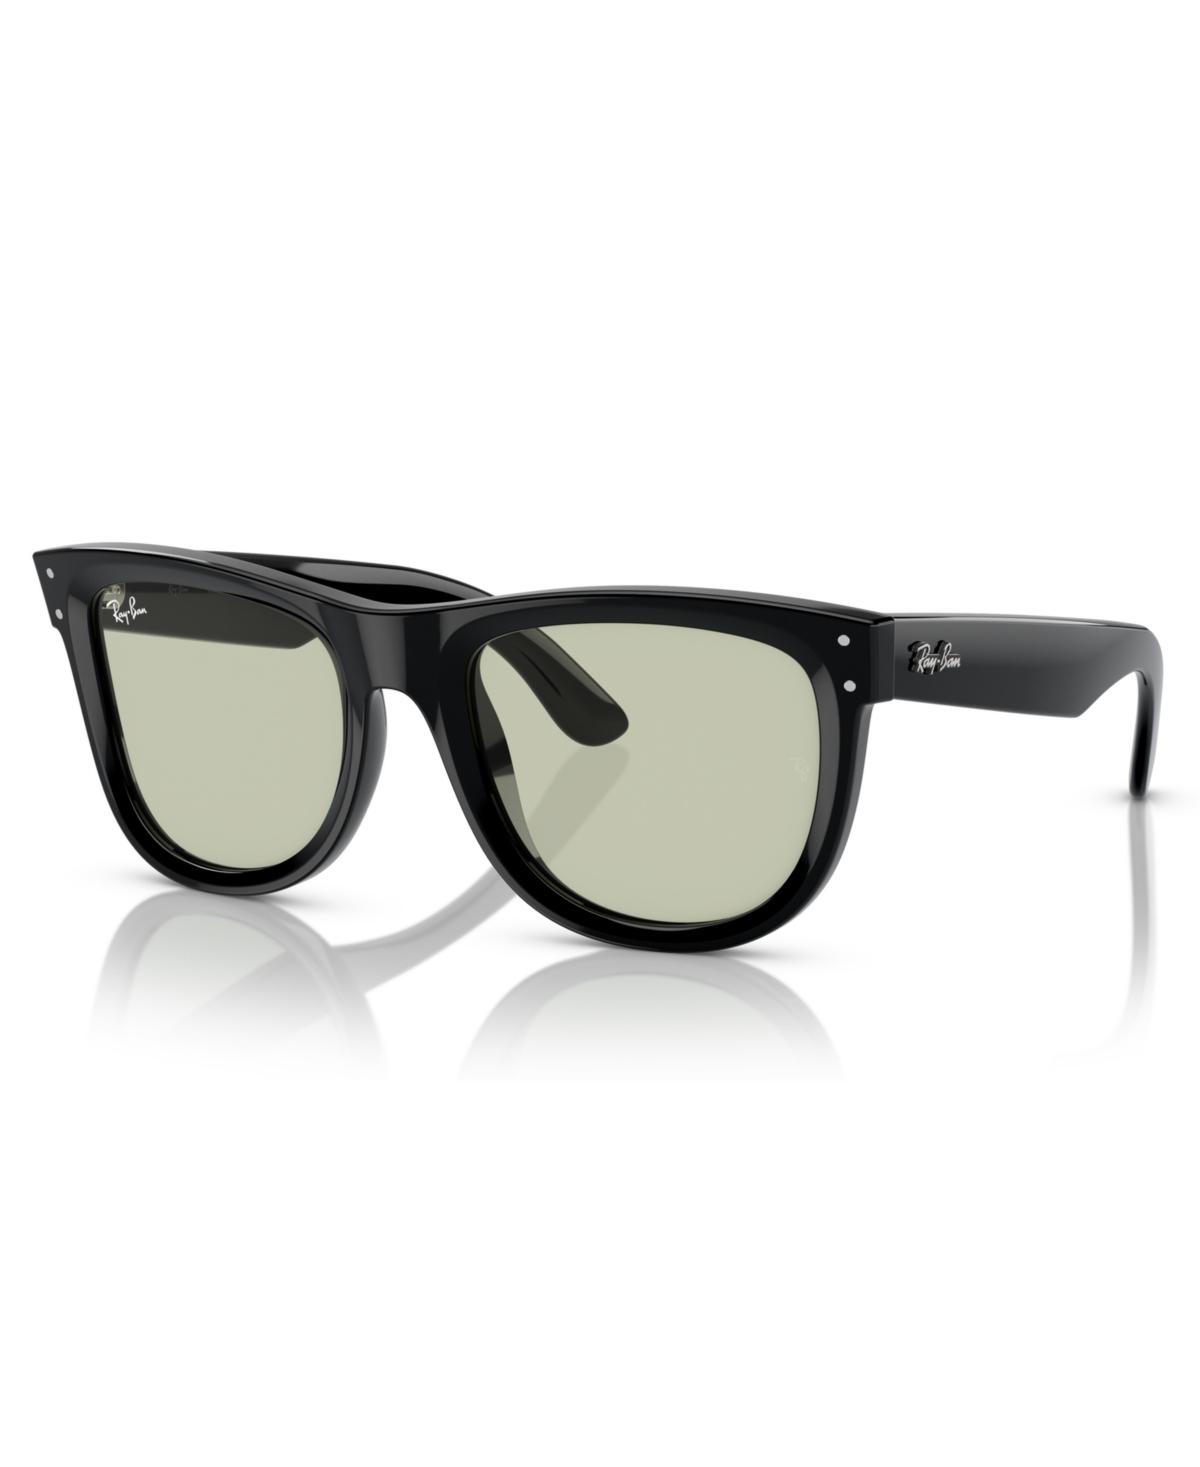 Ray-Ban Men UV Protected Brown Lens Pilot Sunglasses - 0RB3129IW150458 :  Amazon.in: Fashion